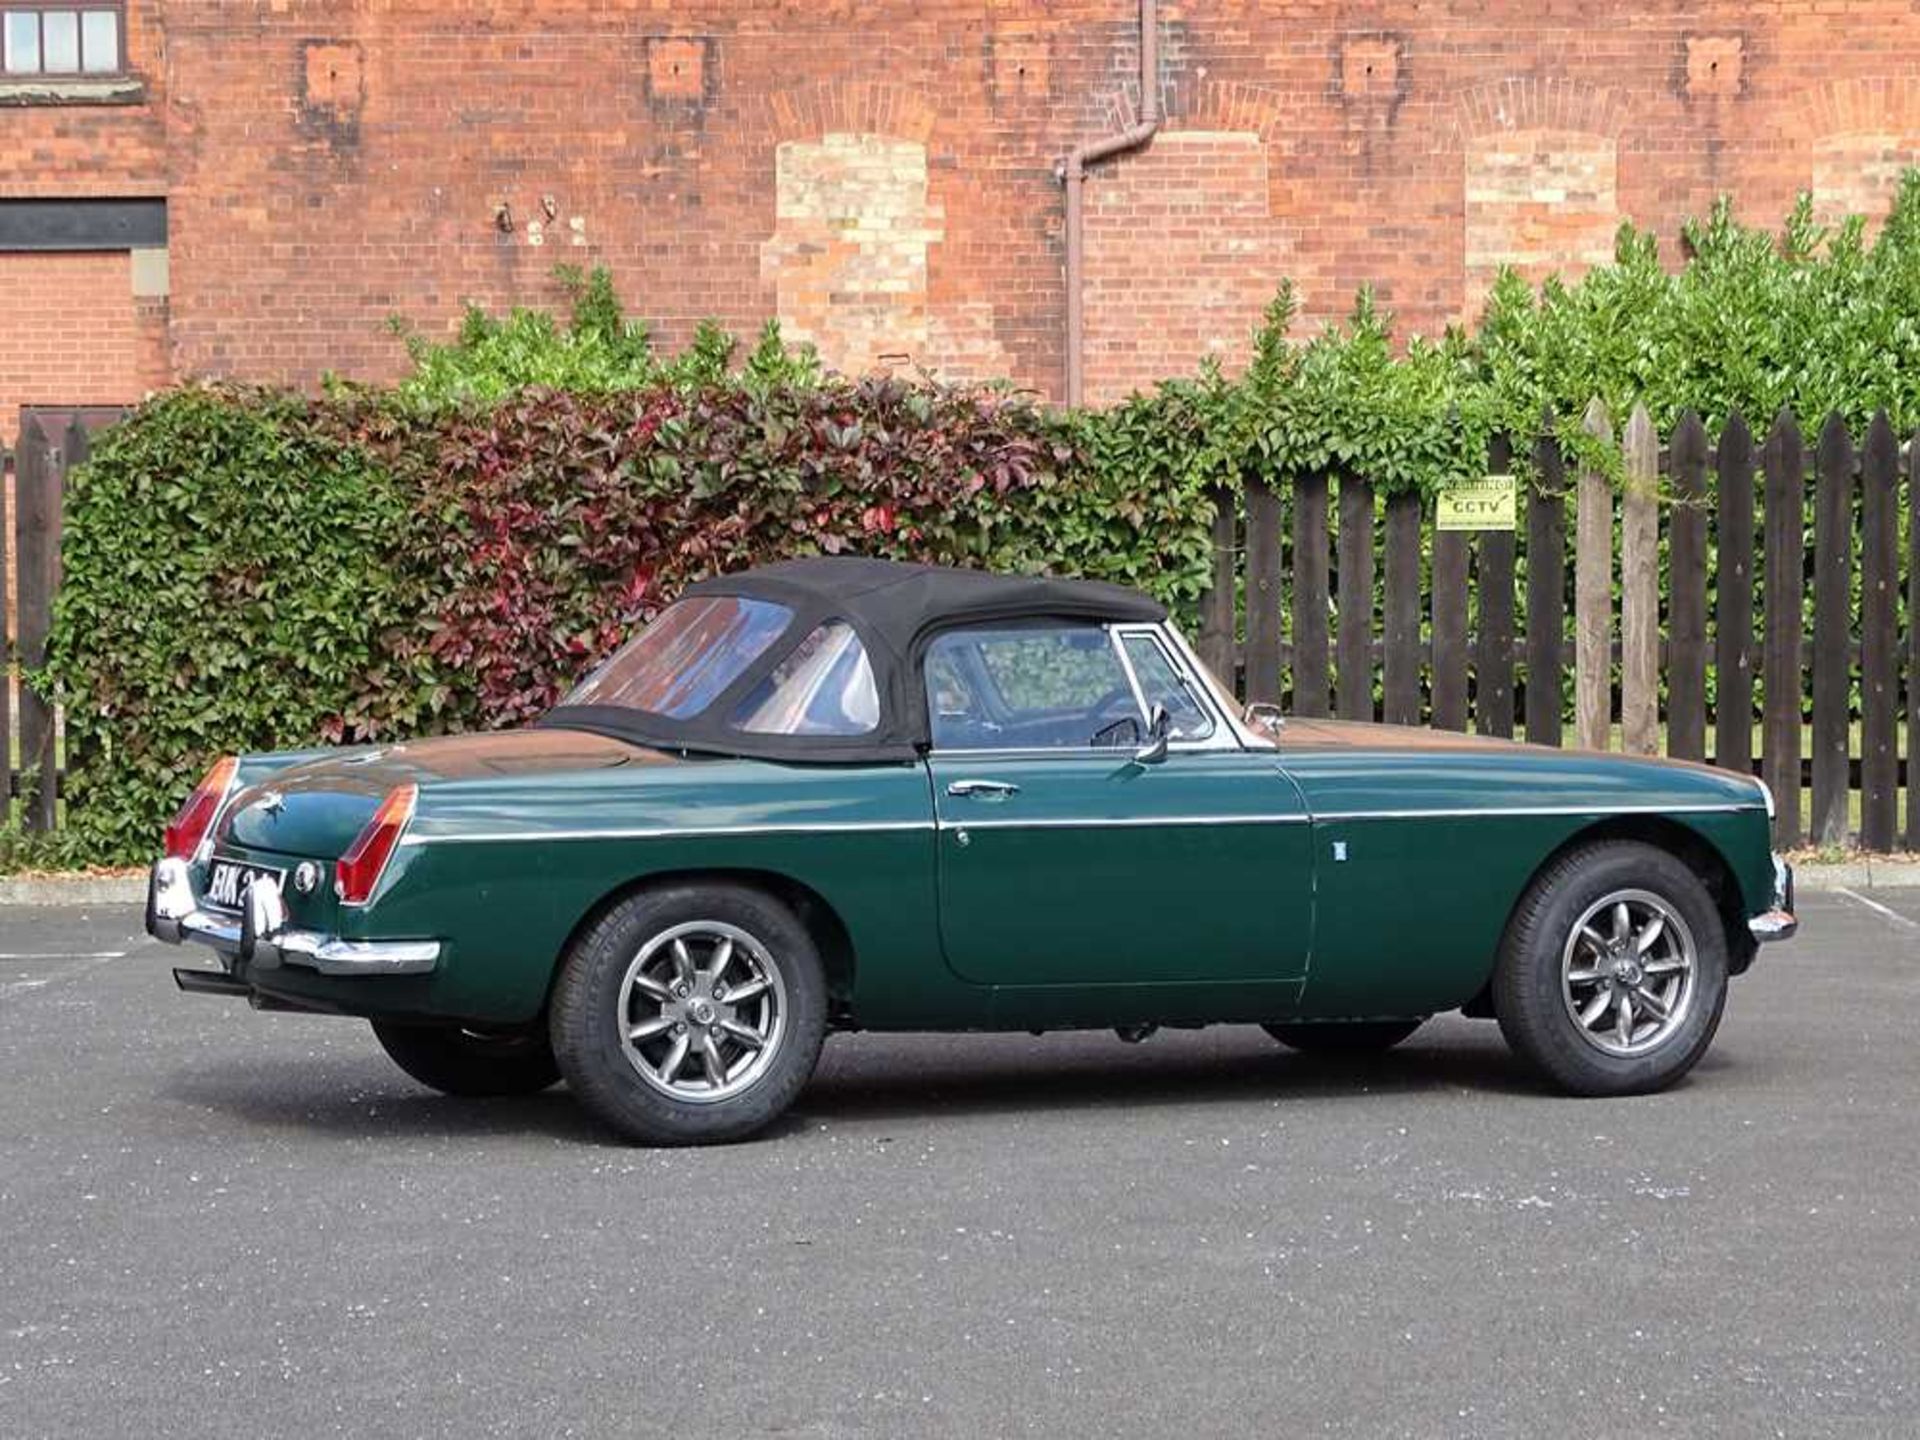 1971 MG B Roadster Restored at a cost of c.£33,000 - Image 20 of 43